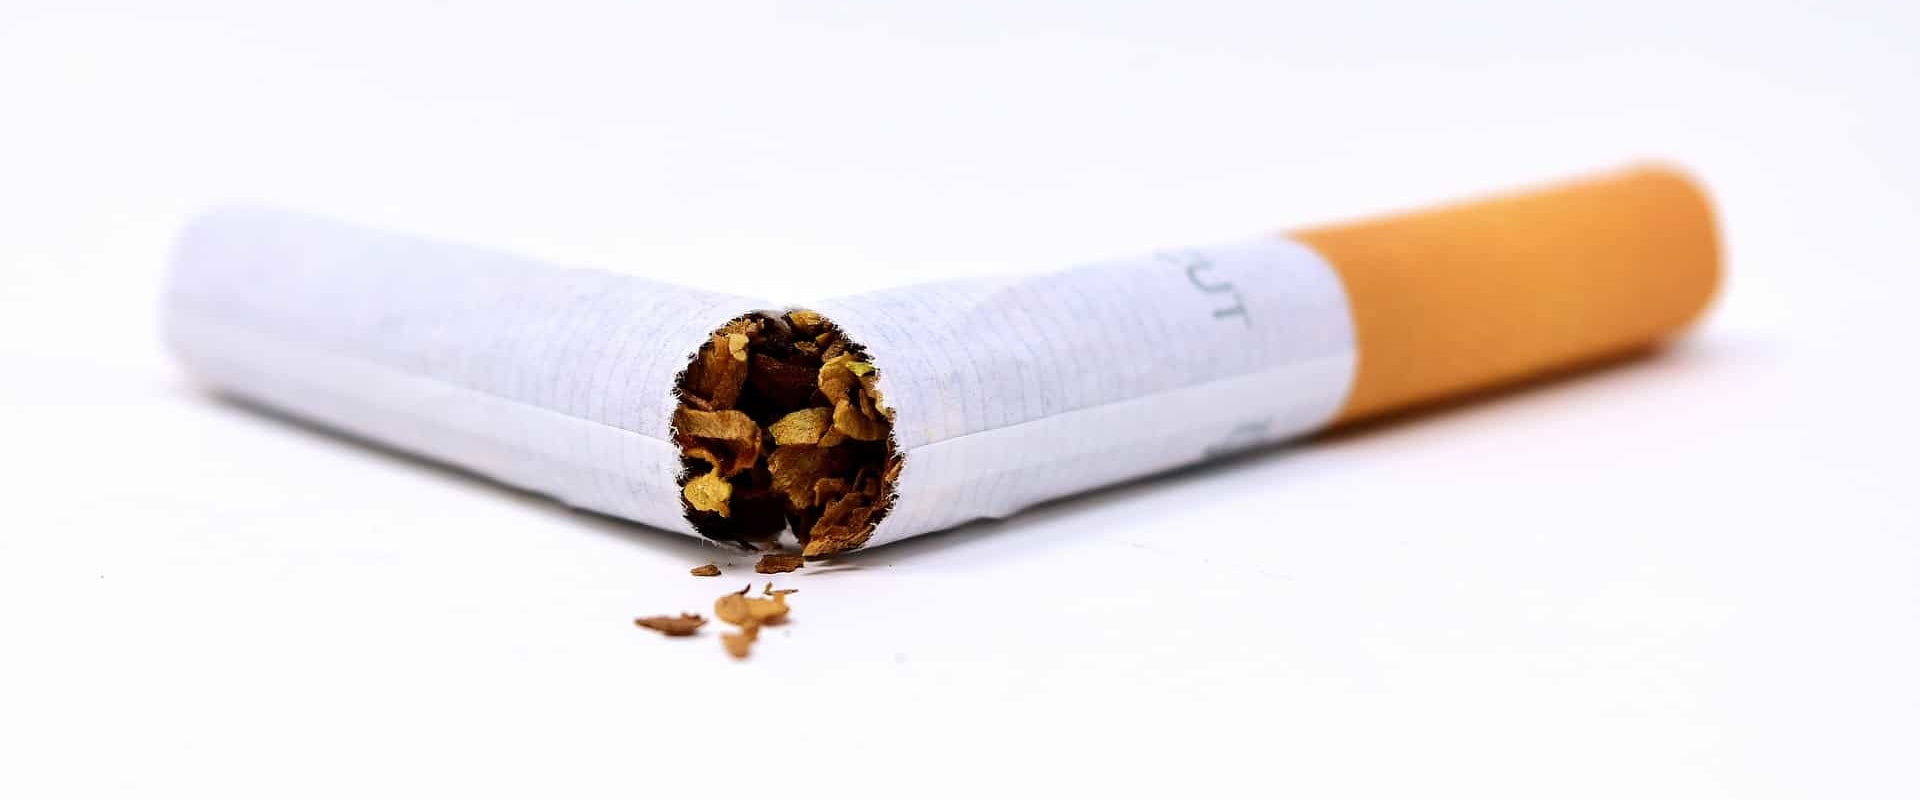 The Tobacco Industry's Deceptive Tactics to Encourage Smoking